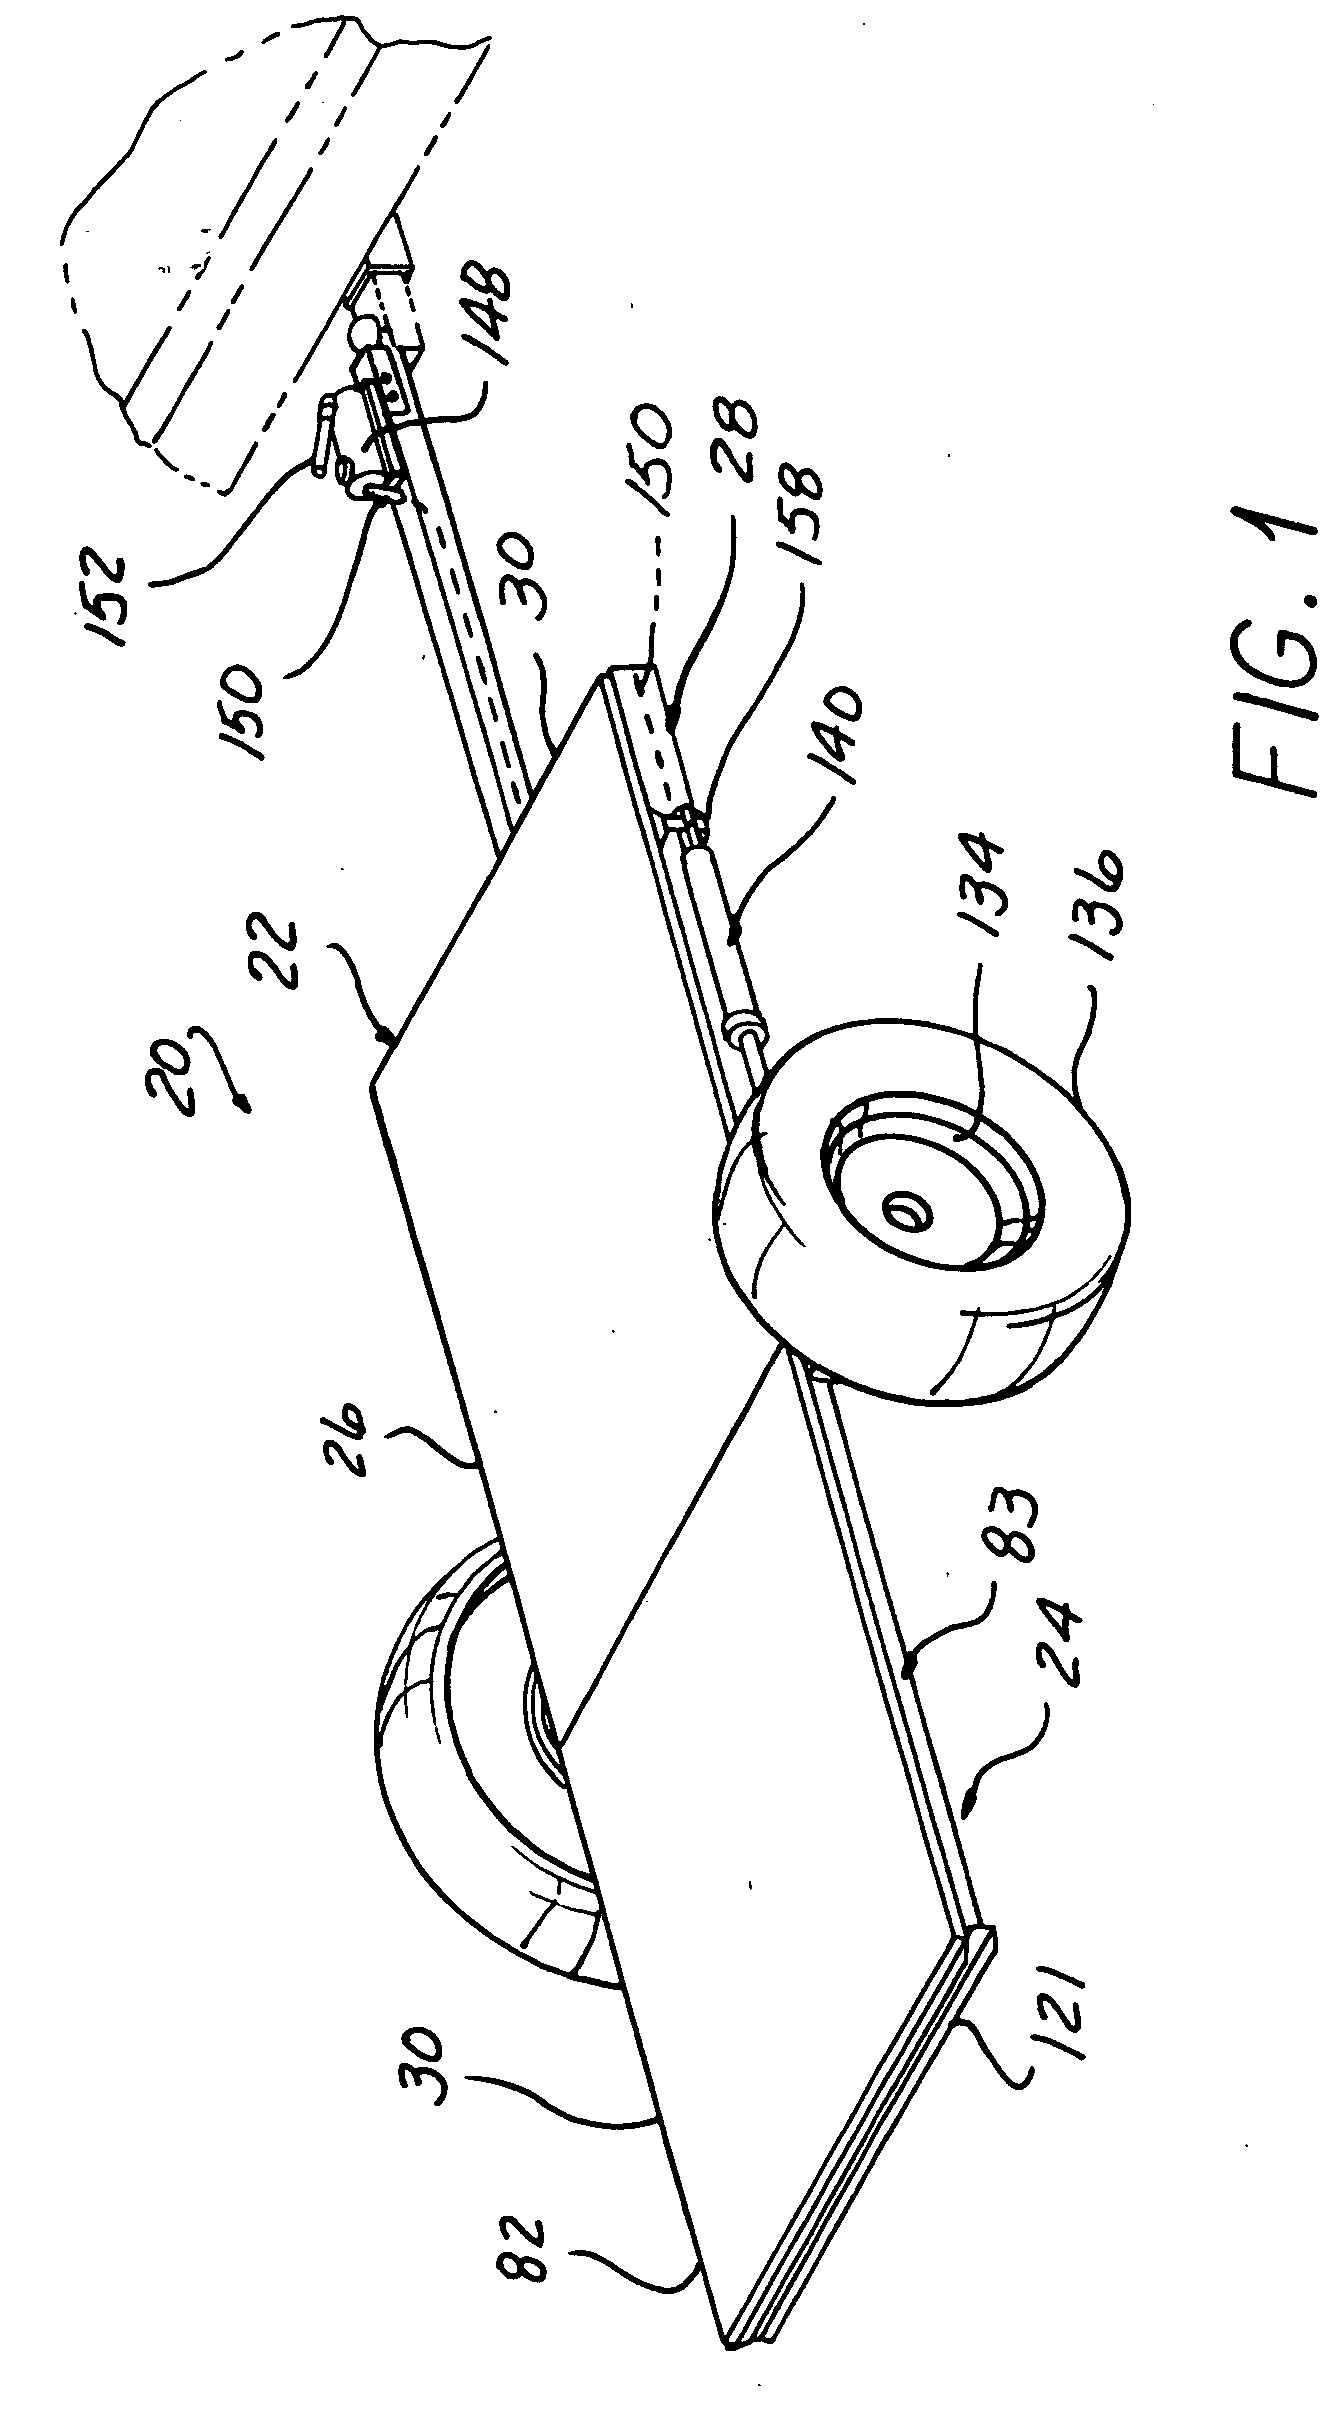 Folding trailer with kneeling device